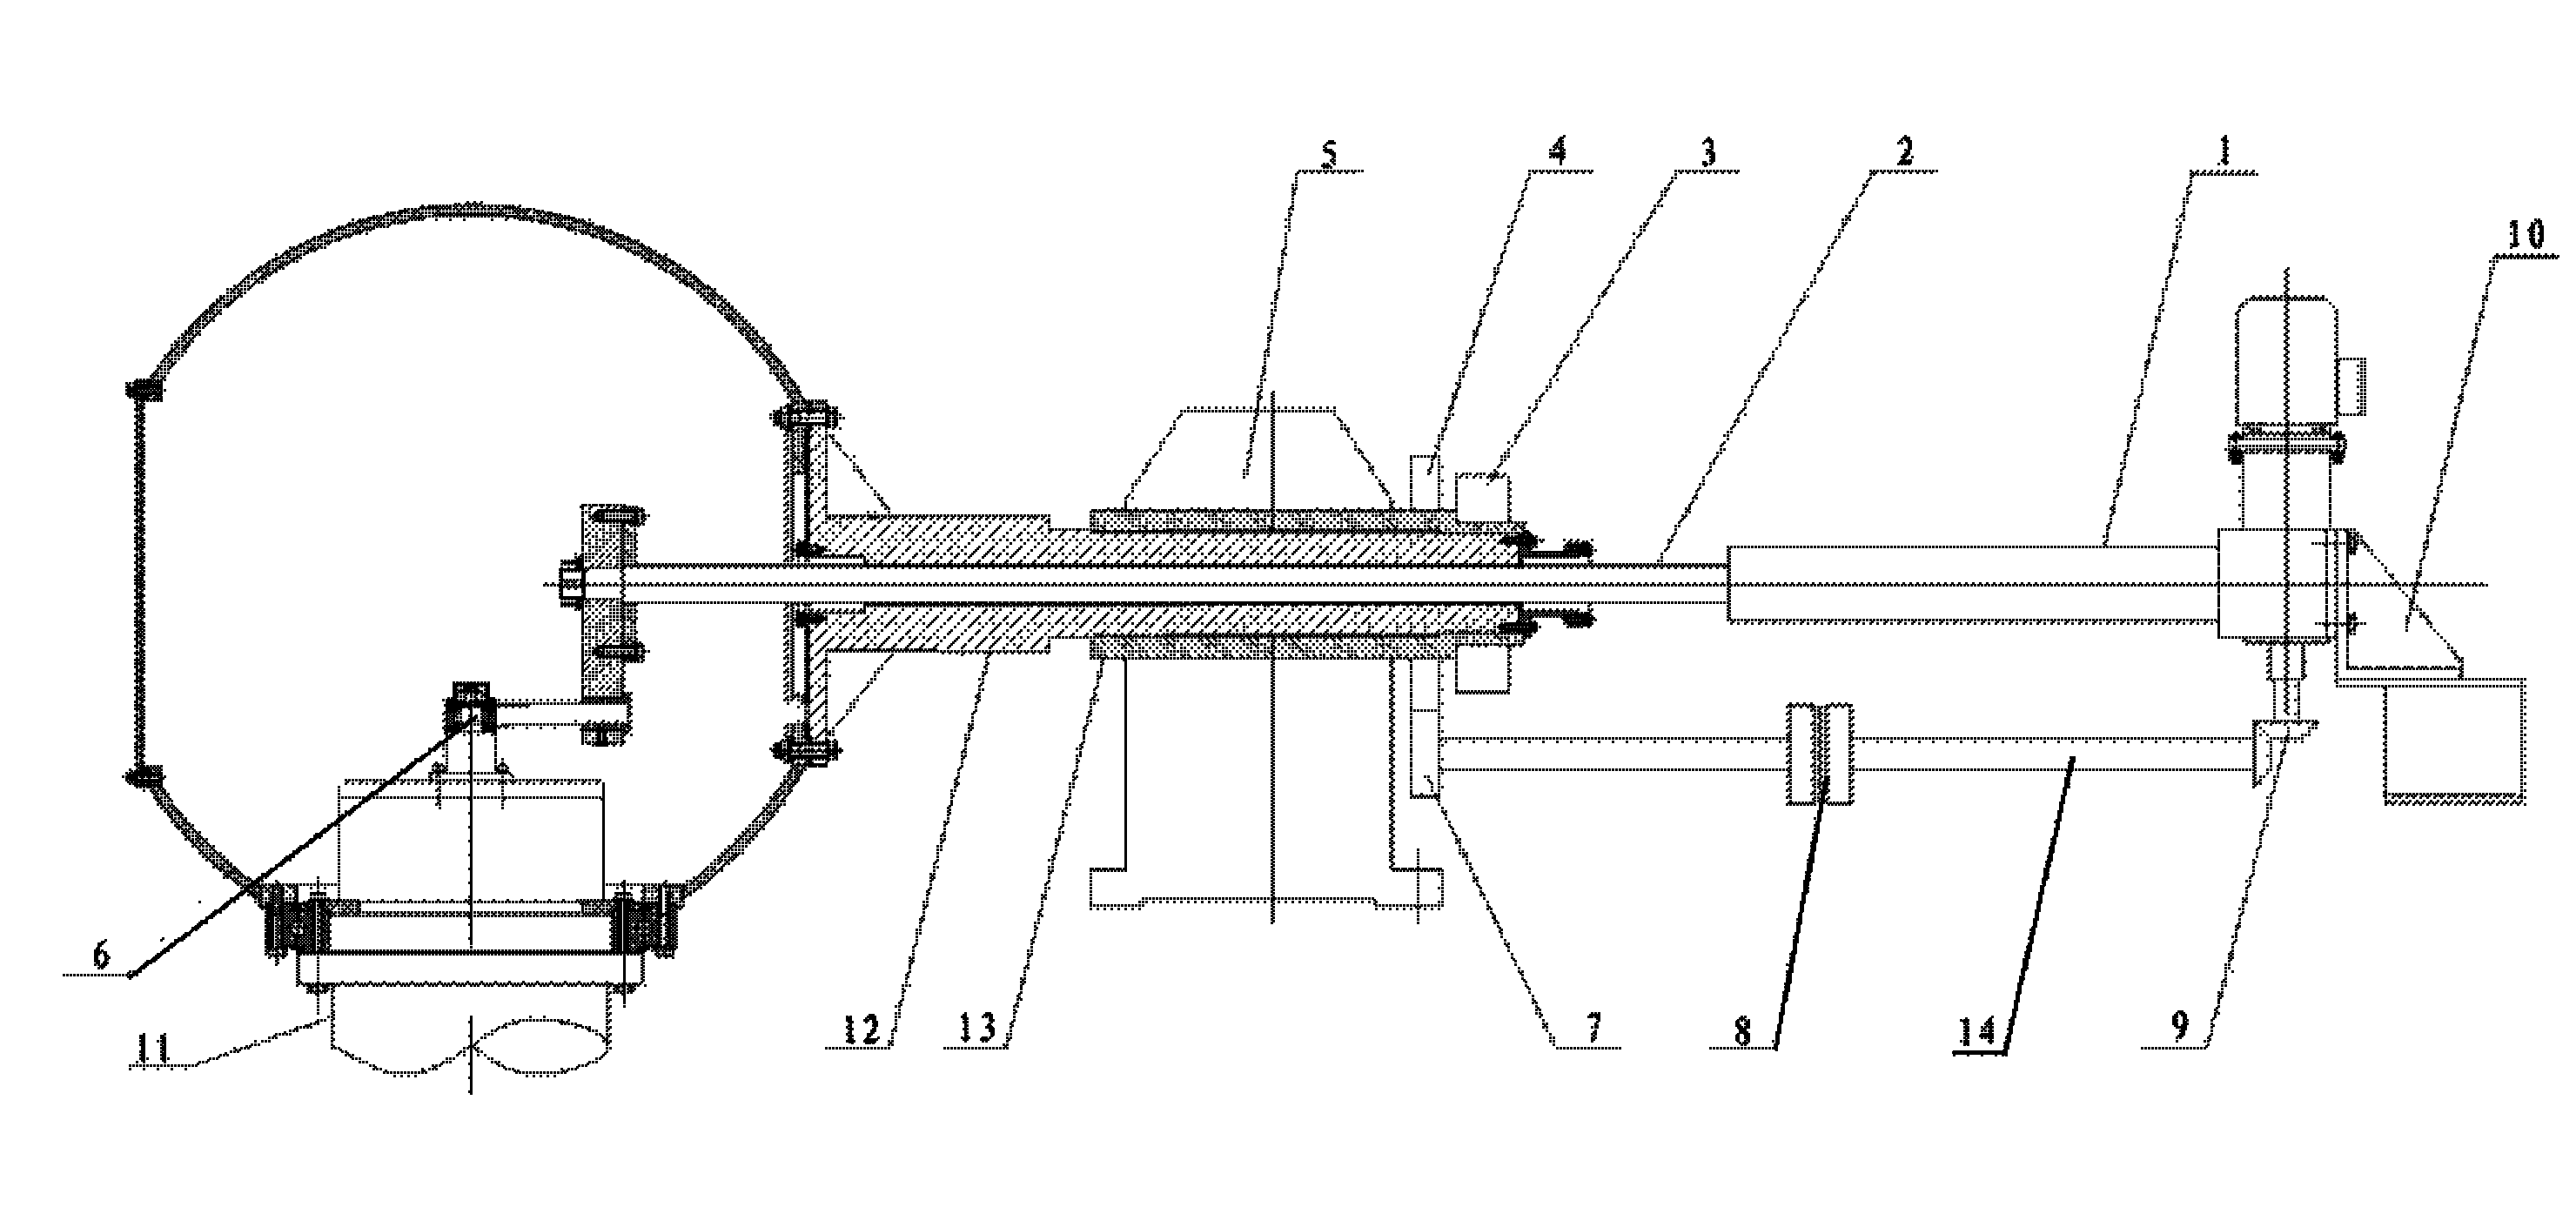 Pitch-varying system for synchronous variable-pitch wind generating set with protection function